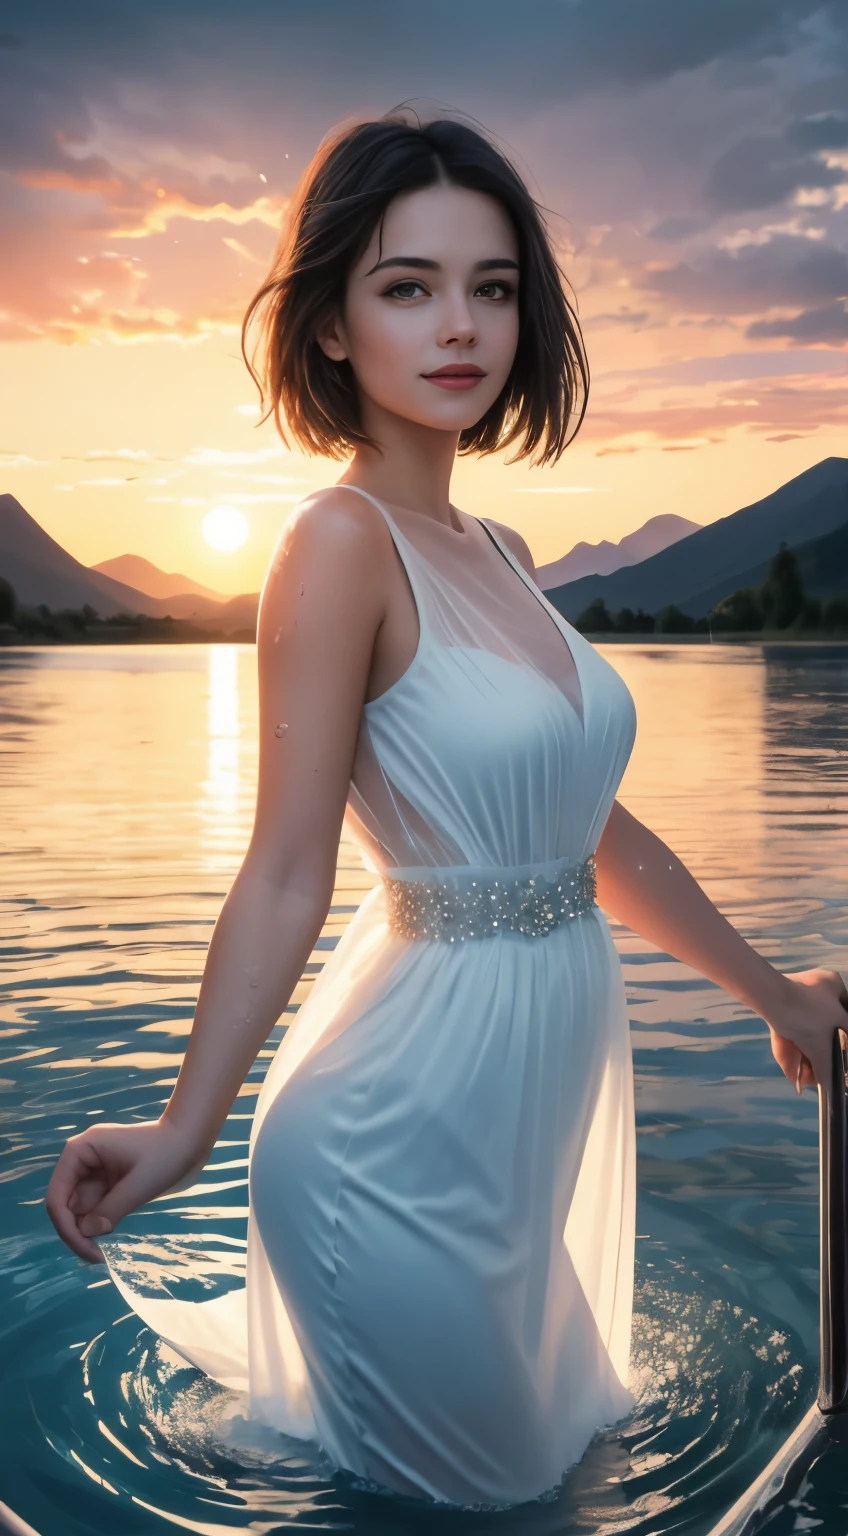 Masterpiece, Best Quality, Film Stills, 1girl, Big , Transparent Dress, Looking at the Audience, Skirt Wet, Swimming in the River, Mountains in the Distance, White Clouds, Bright, Happy, Warm Soft Lights, Sunset, Detailed Water Surface Ripples (Water Droplets: 0.7)